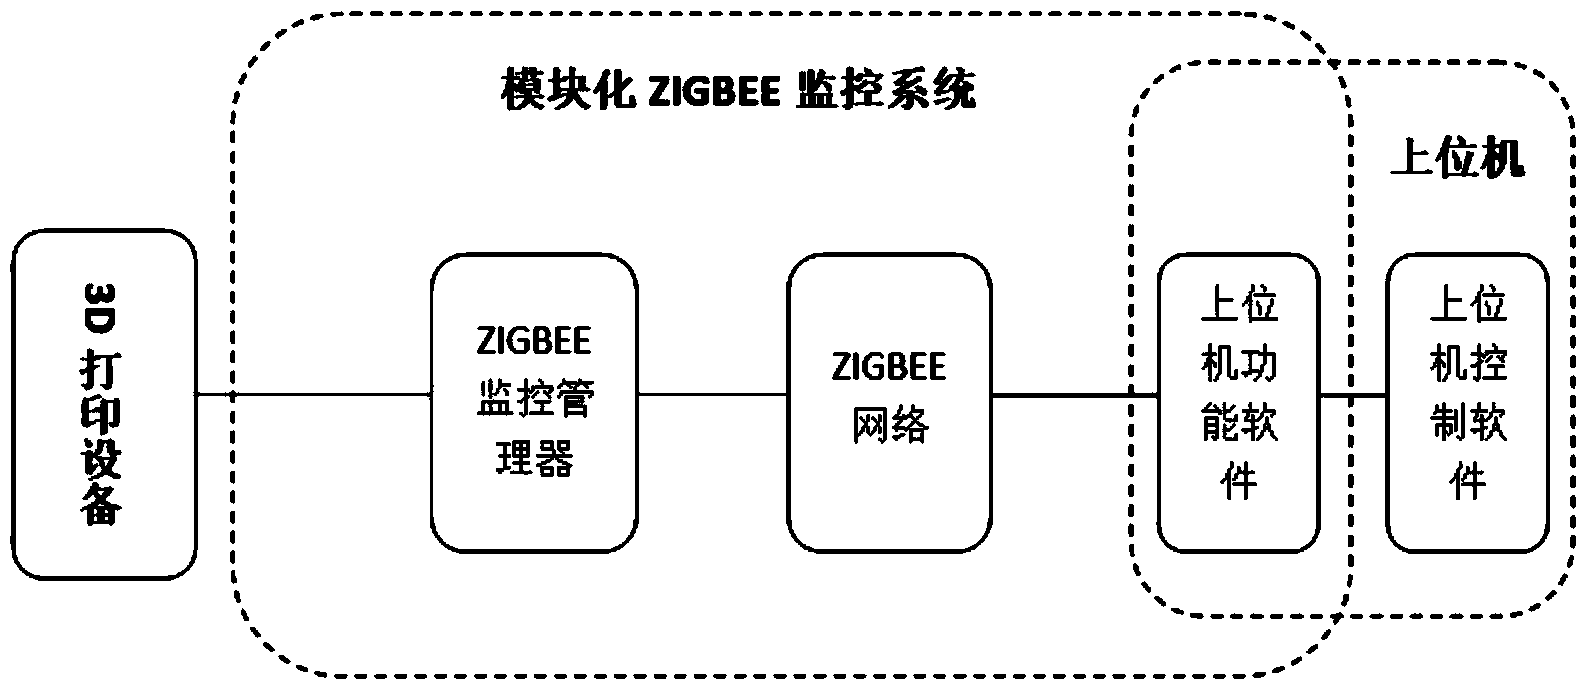 Modularized Zigbee monitoring system applied to 3D printing equipment